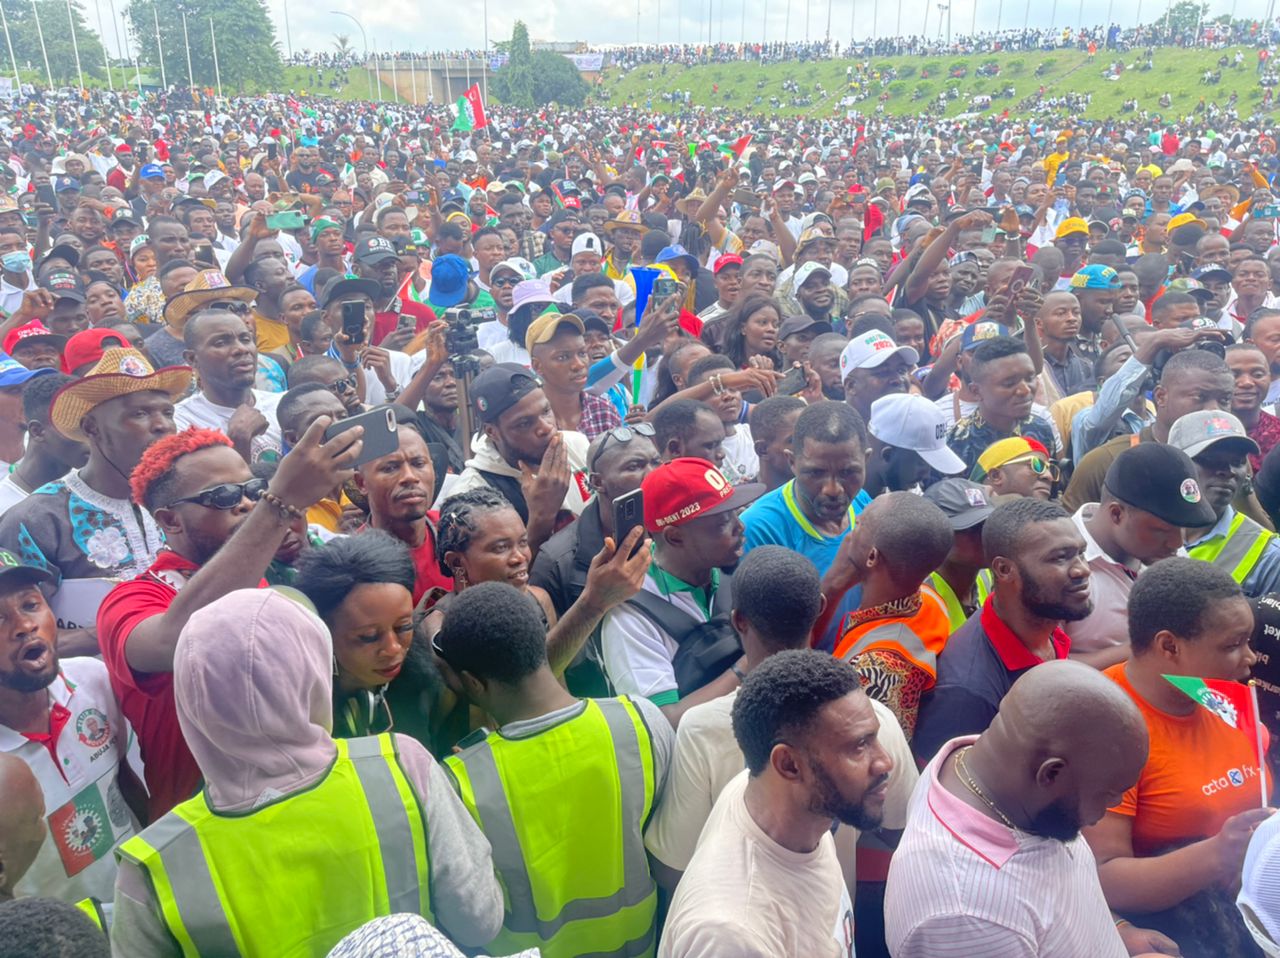 Peter Obi’s supporters during the Abuja march on Saturday.